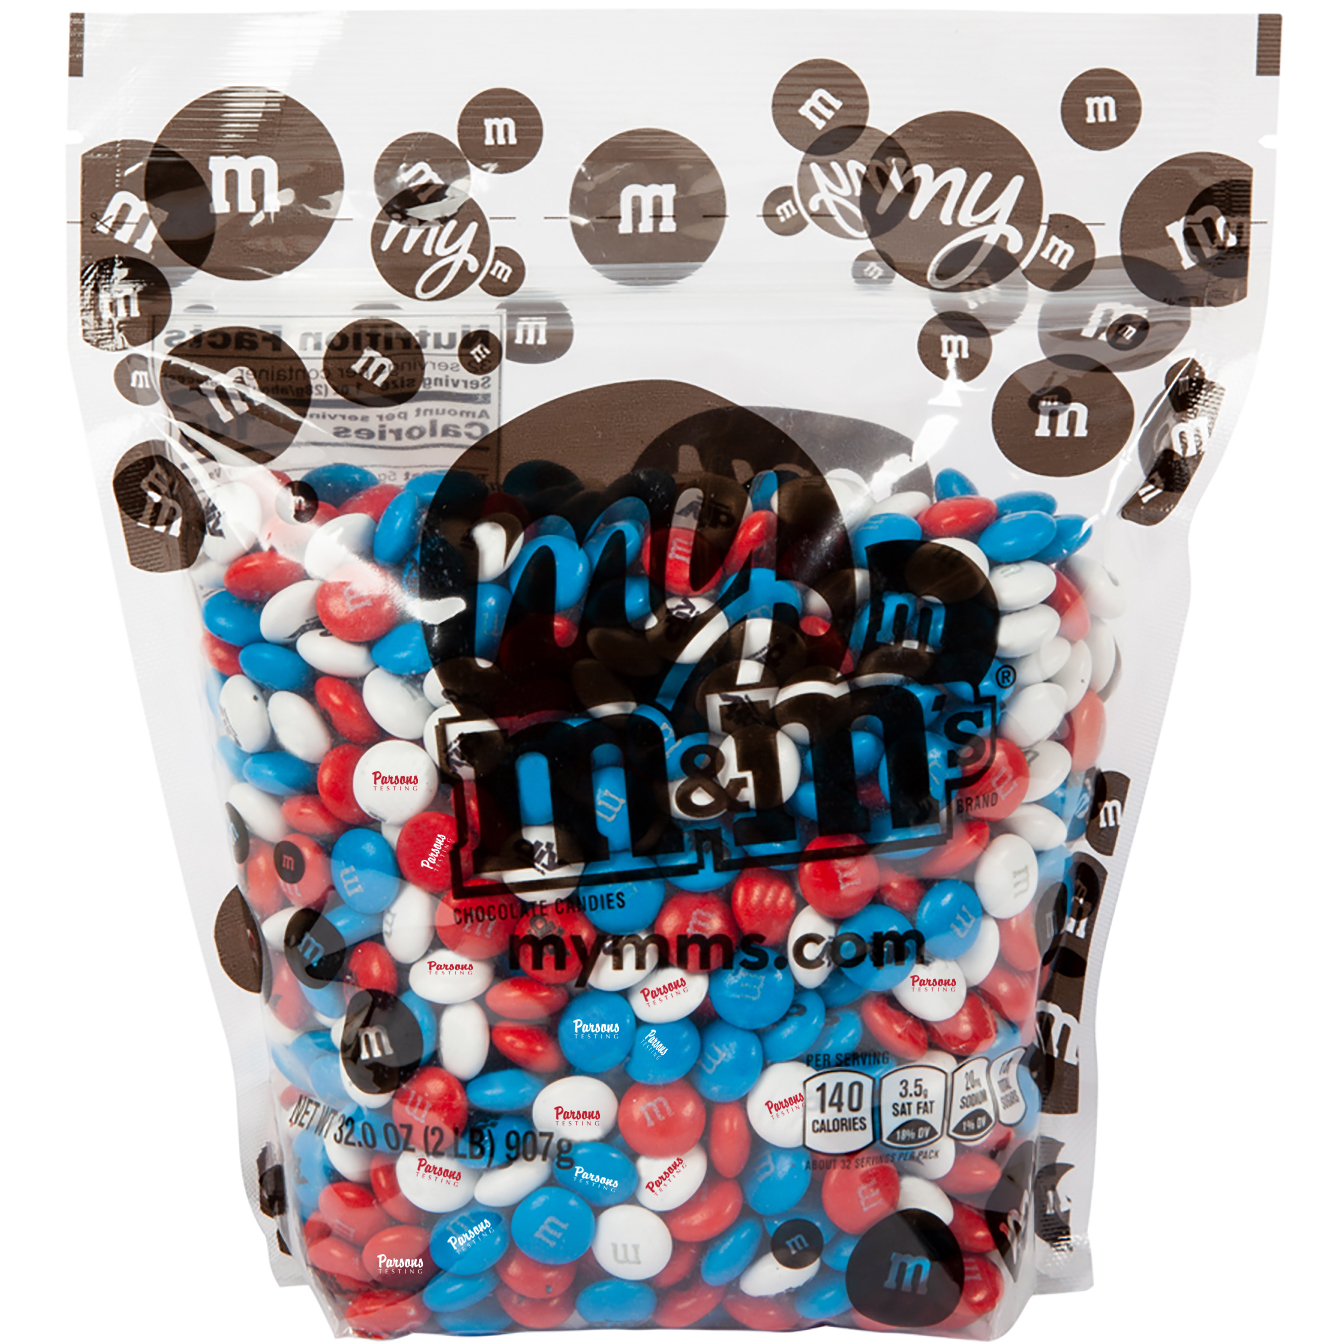 Personalized M&M's,Create your own M&M's by Acro Printer Acro Technology